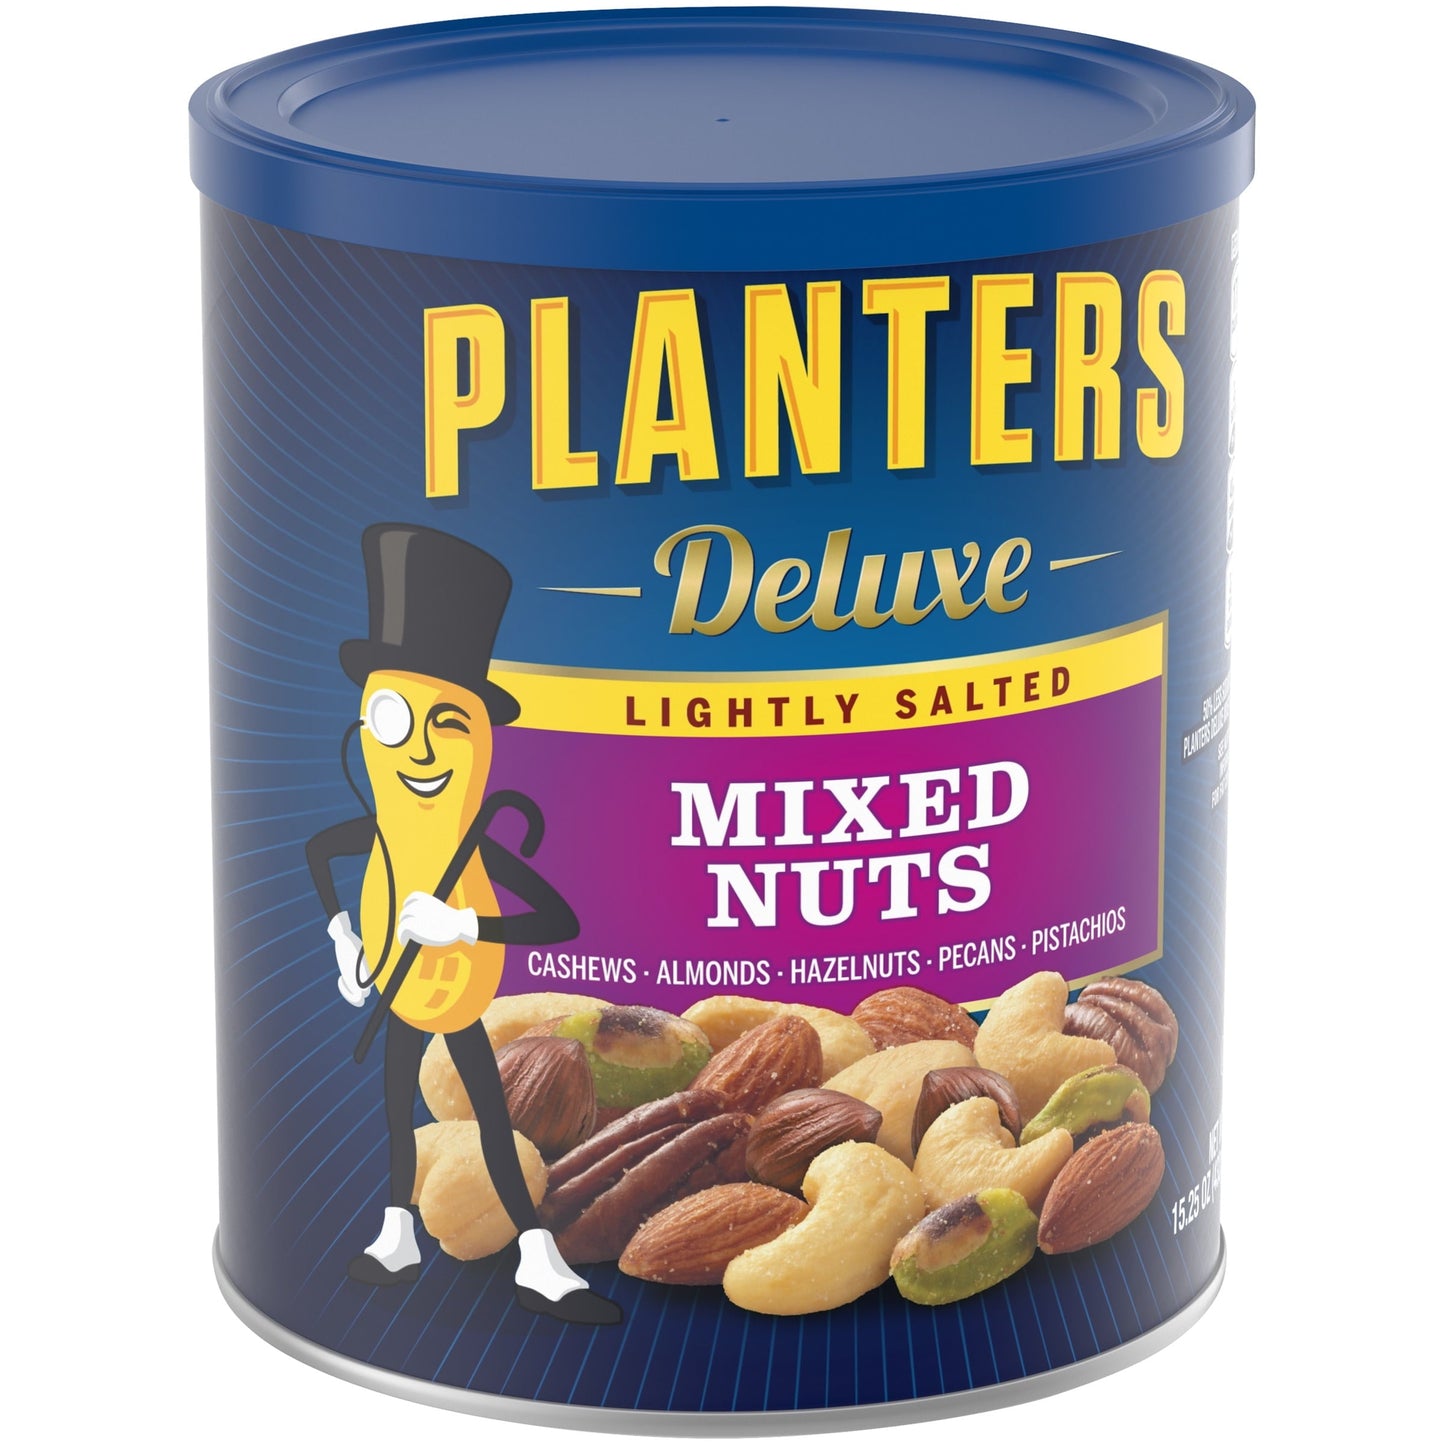 Planters Deluxe Lightly Salted Mixed Nuts with Cashews, Almonds, Hazelnuts, Pecans & Pistachios, 15.25 oz Canister